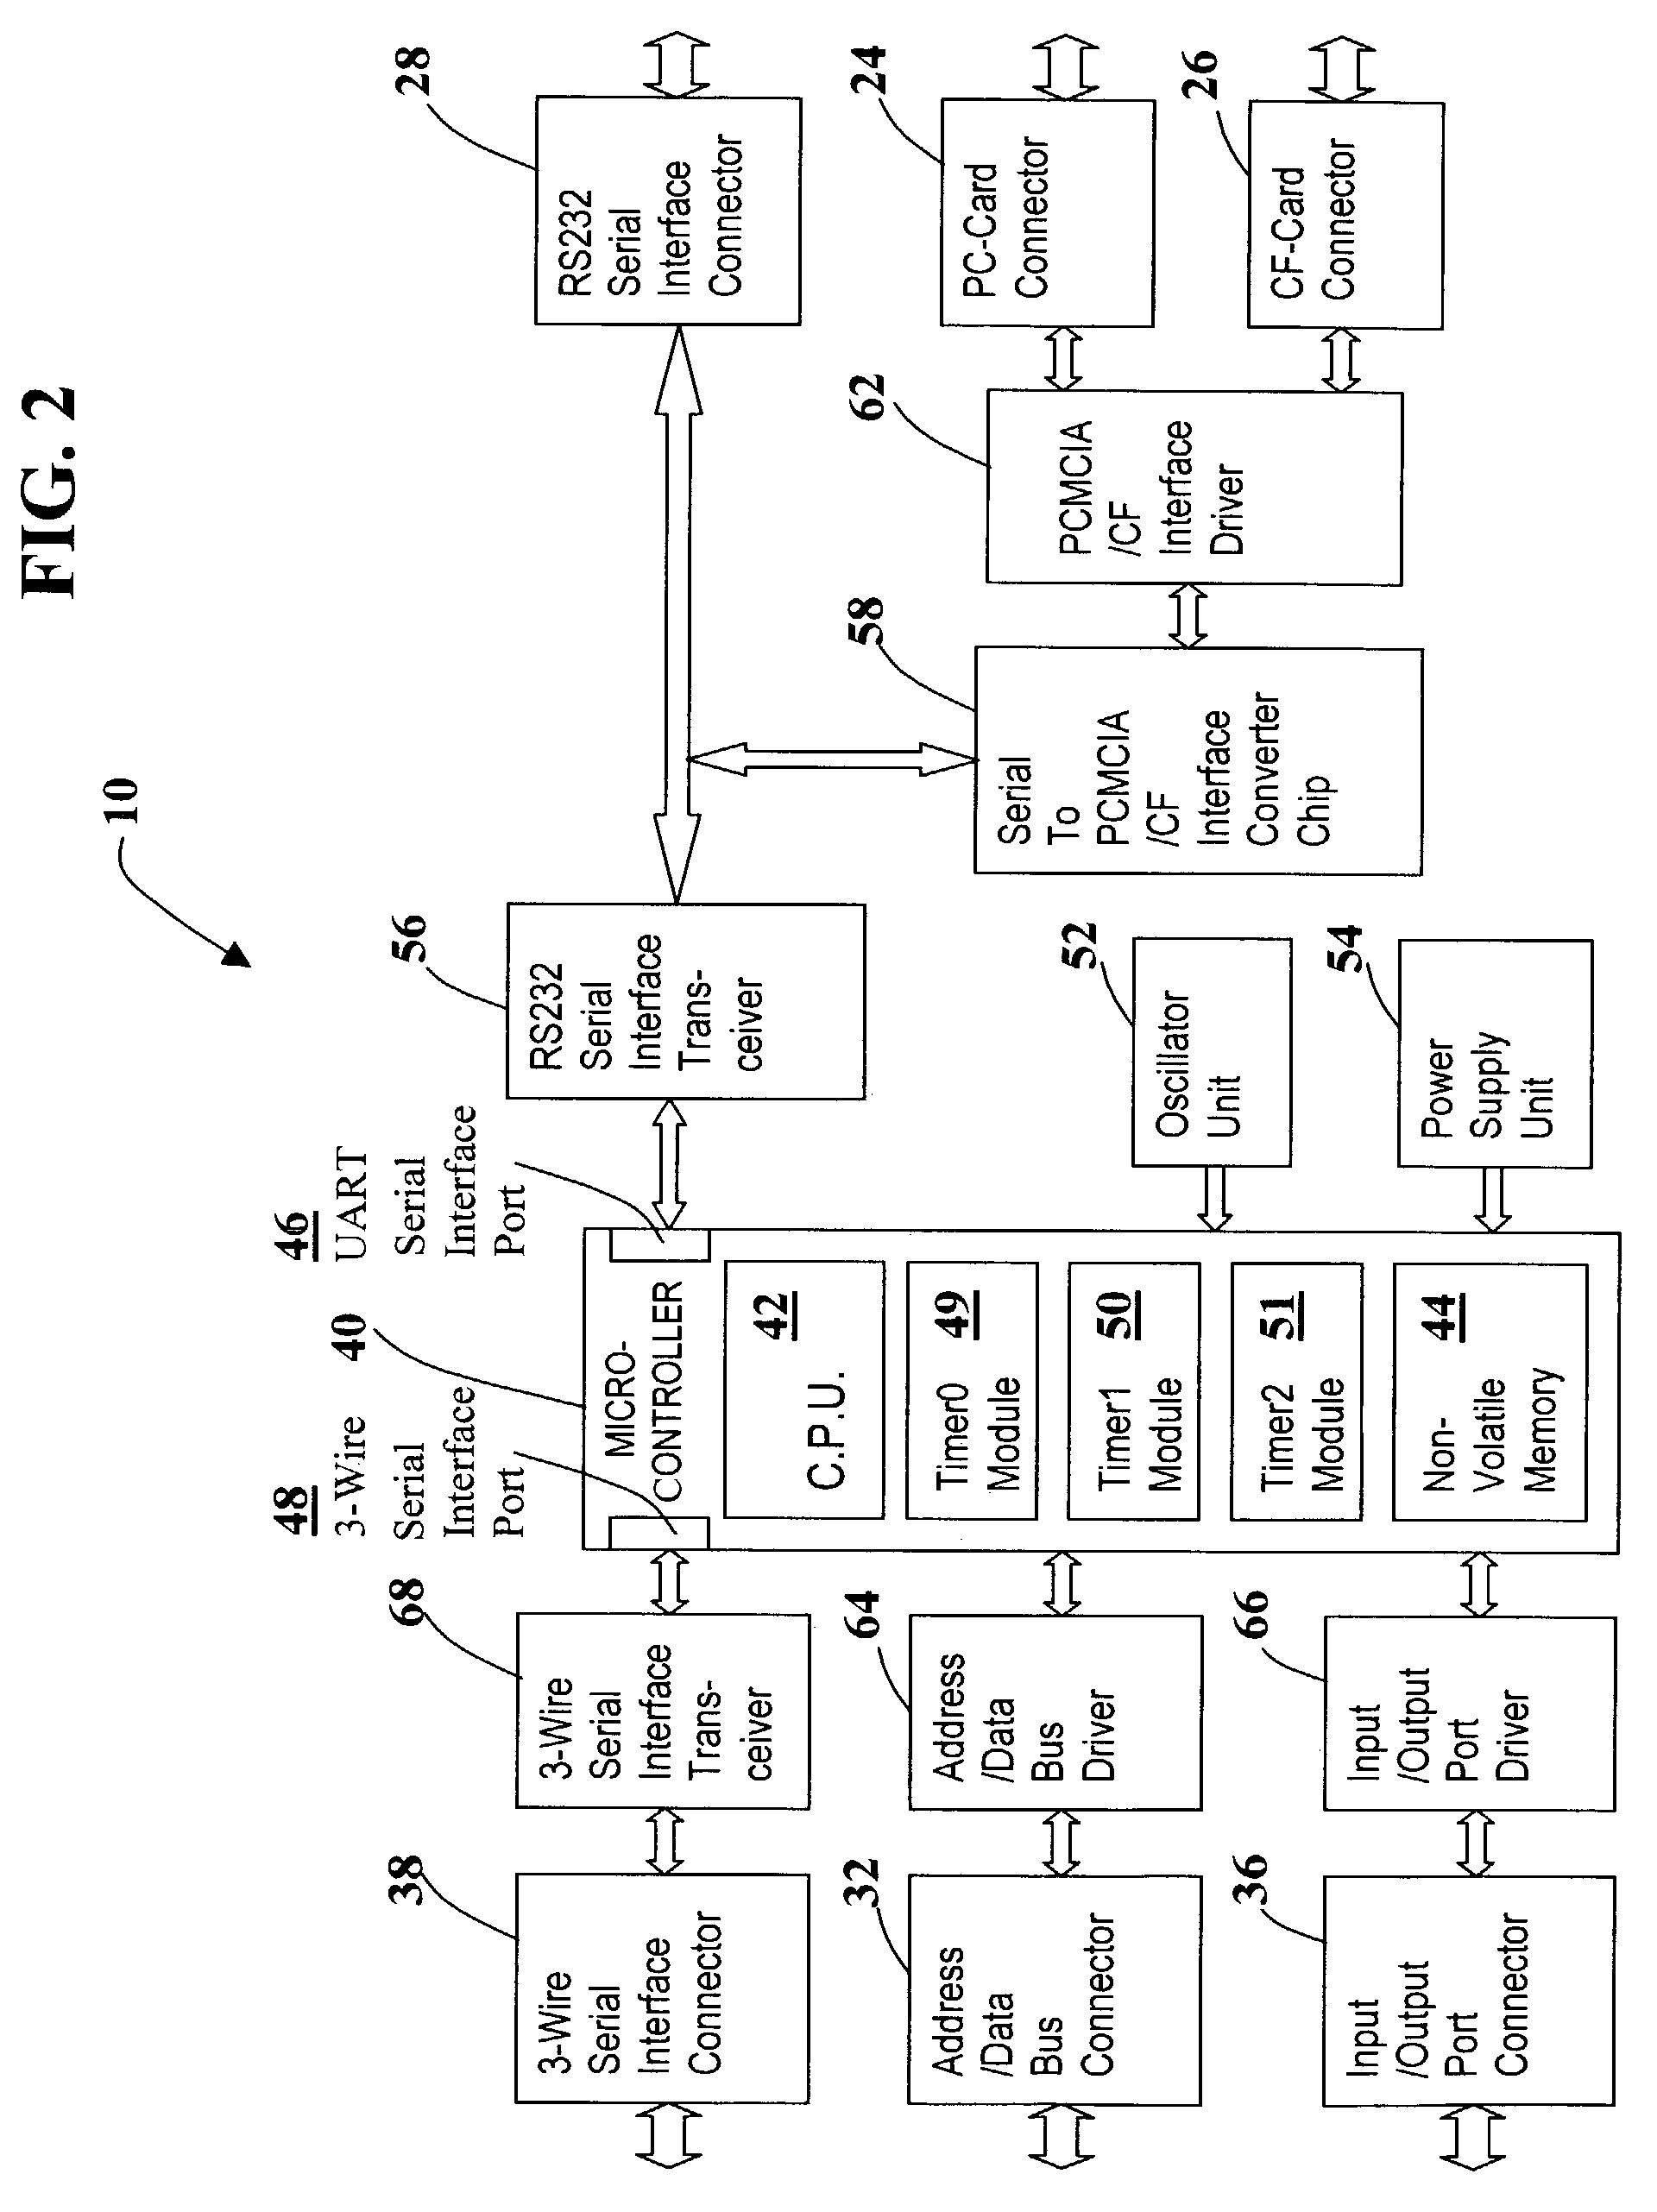 Dedicated device for automatically accessing wireless internet network and supplying wireless packet data-based indoor-capable GPS locations